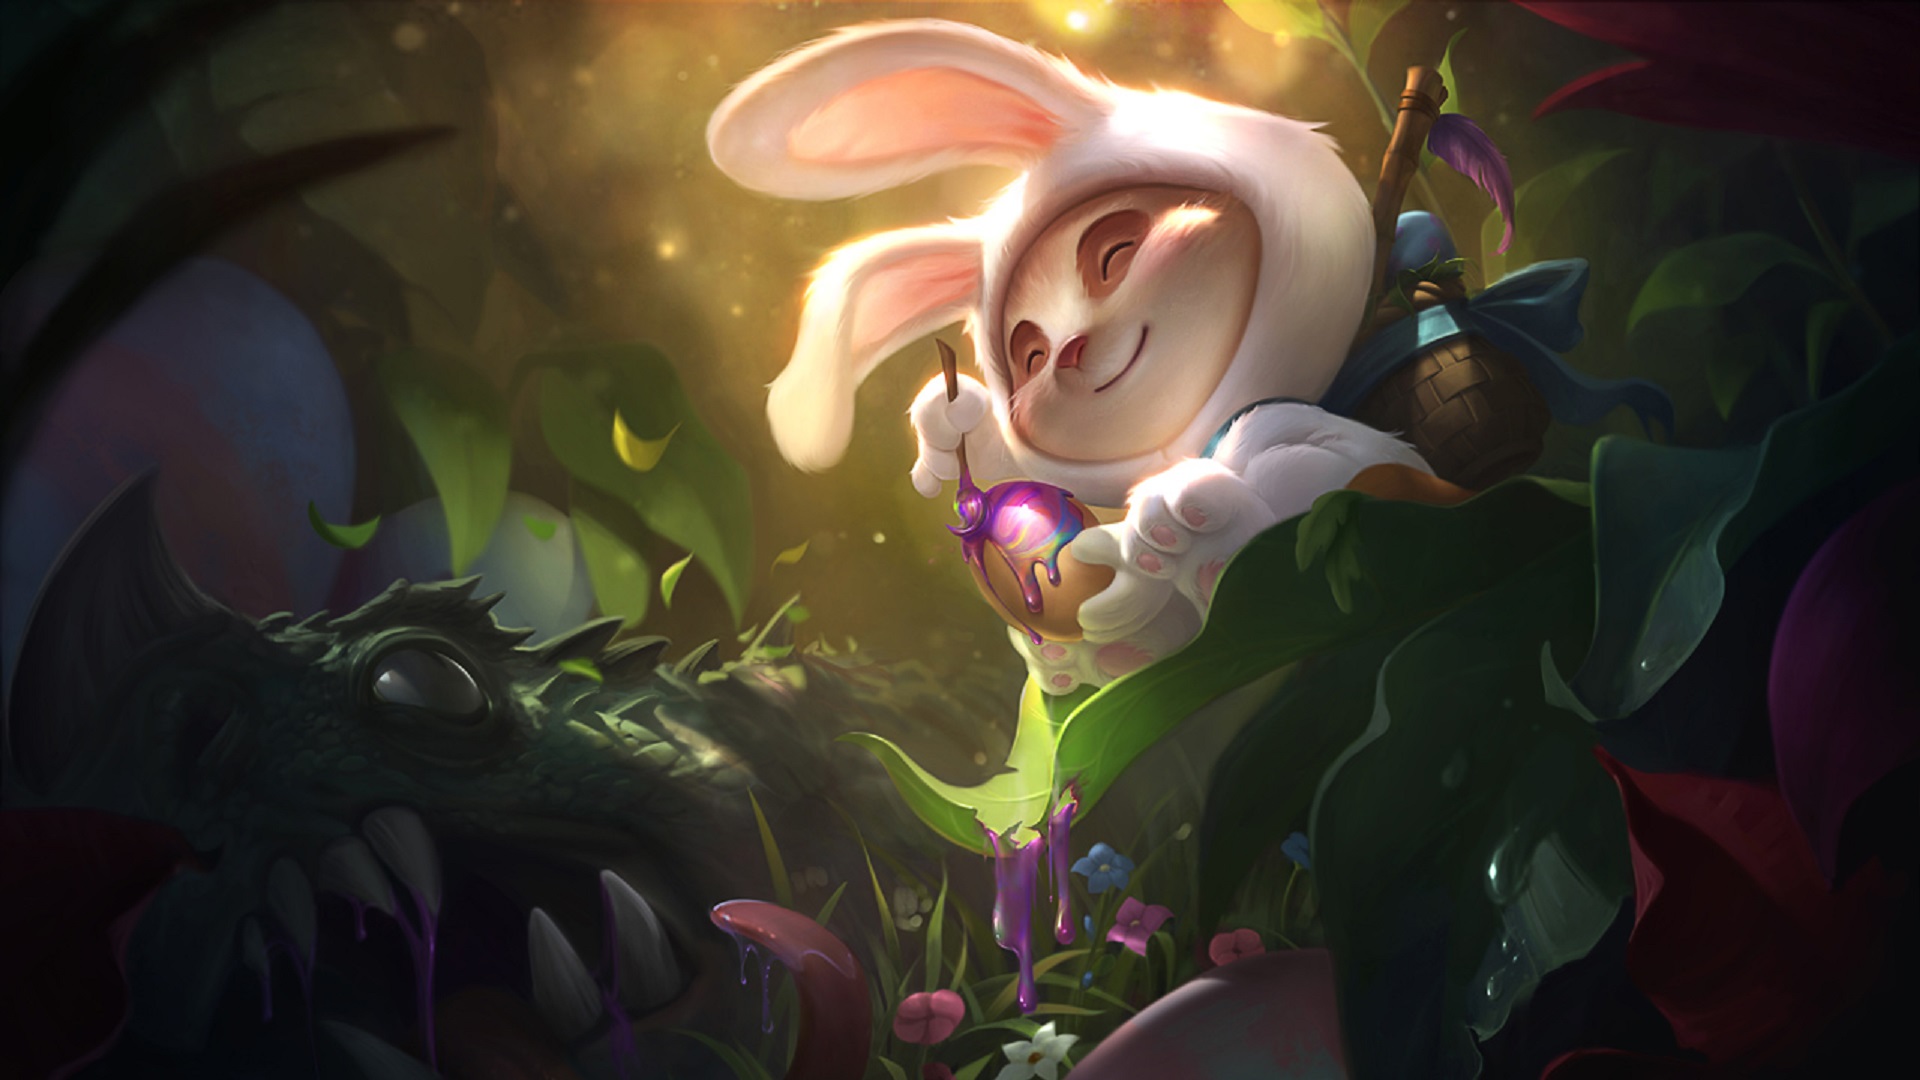 Teemo dressed up as a bunny painting an Easter egg